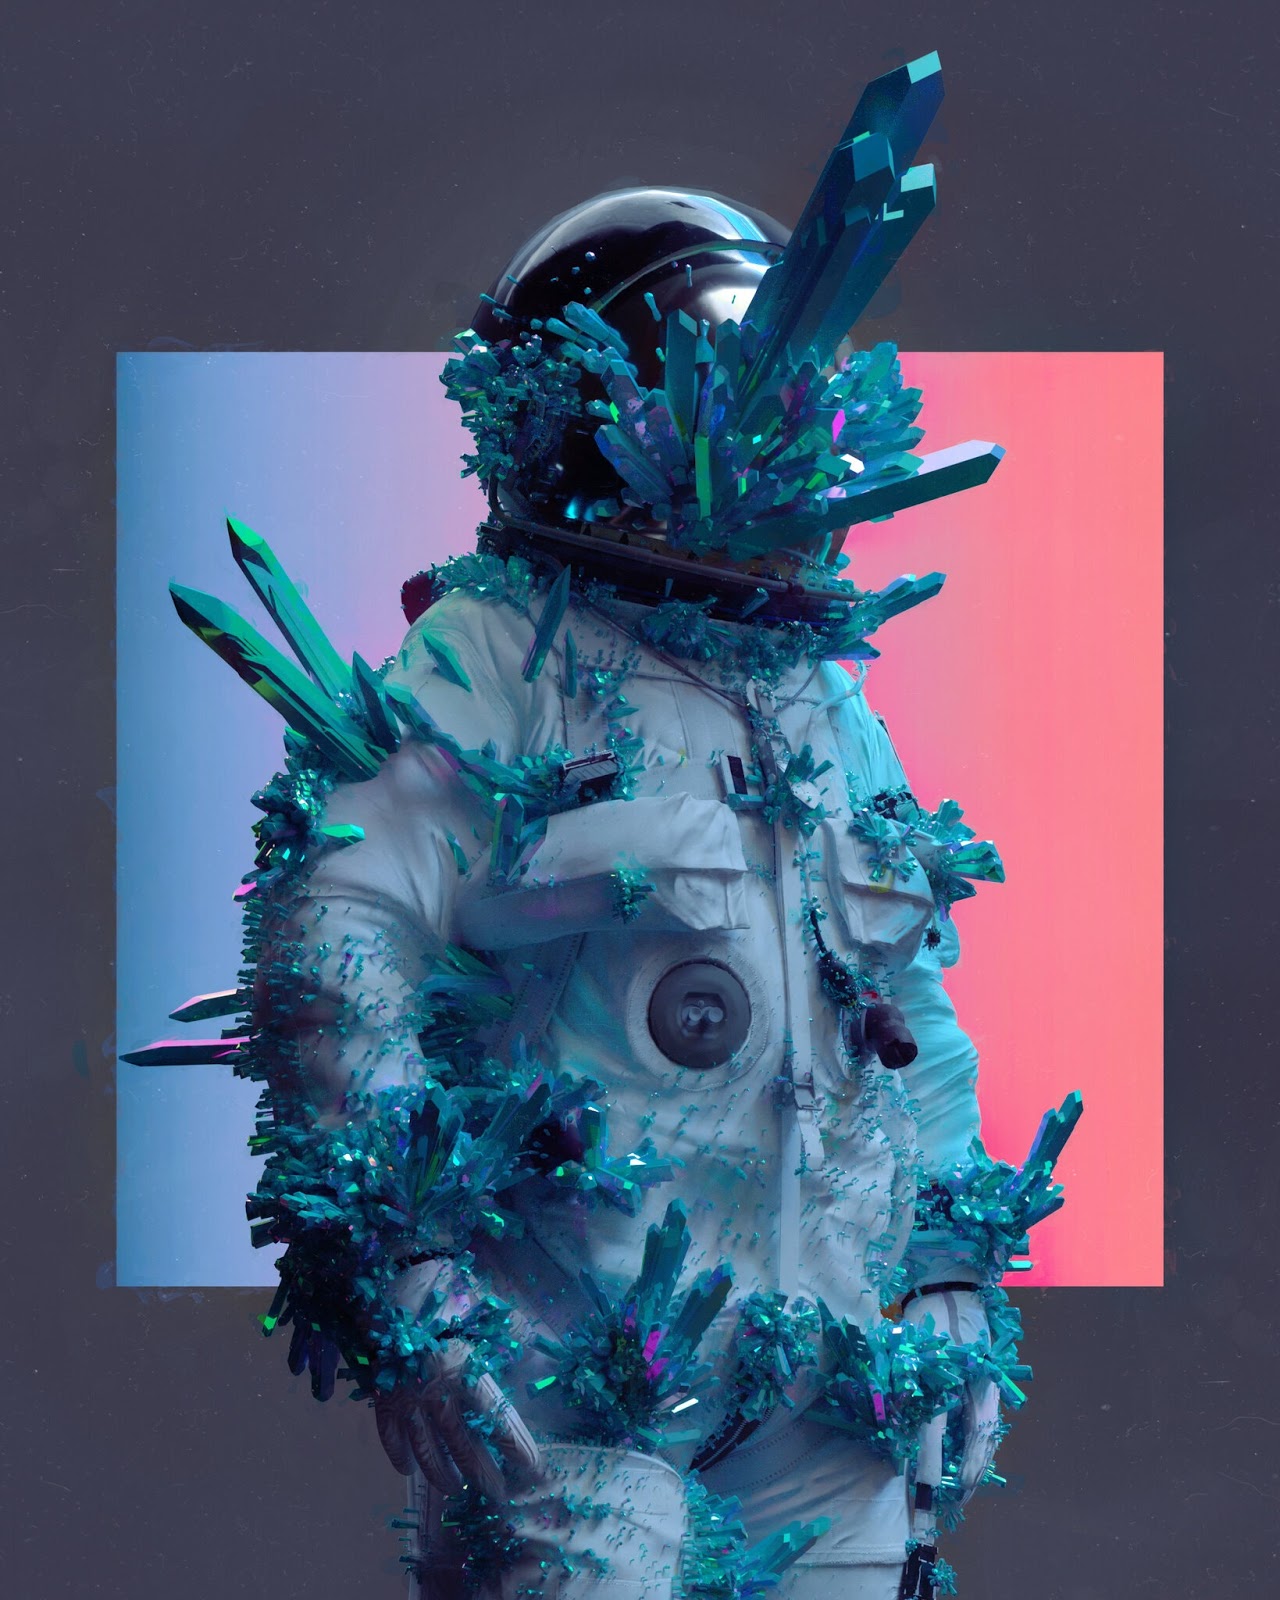 Space Man with rocks and crystals protruding out of him on red and blue lit background